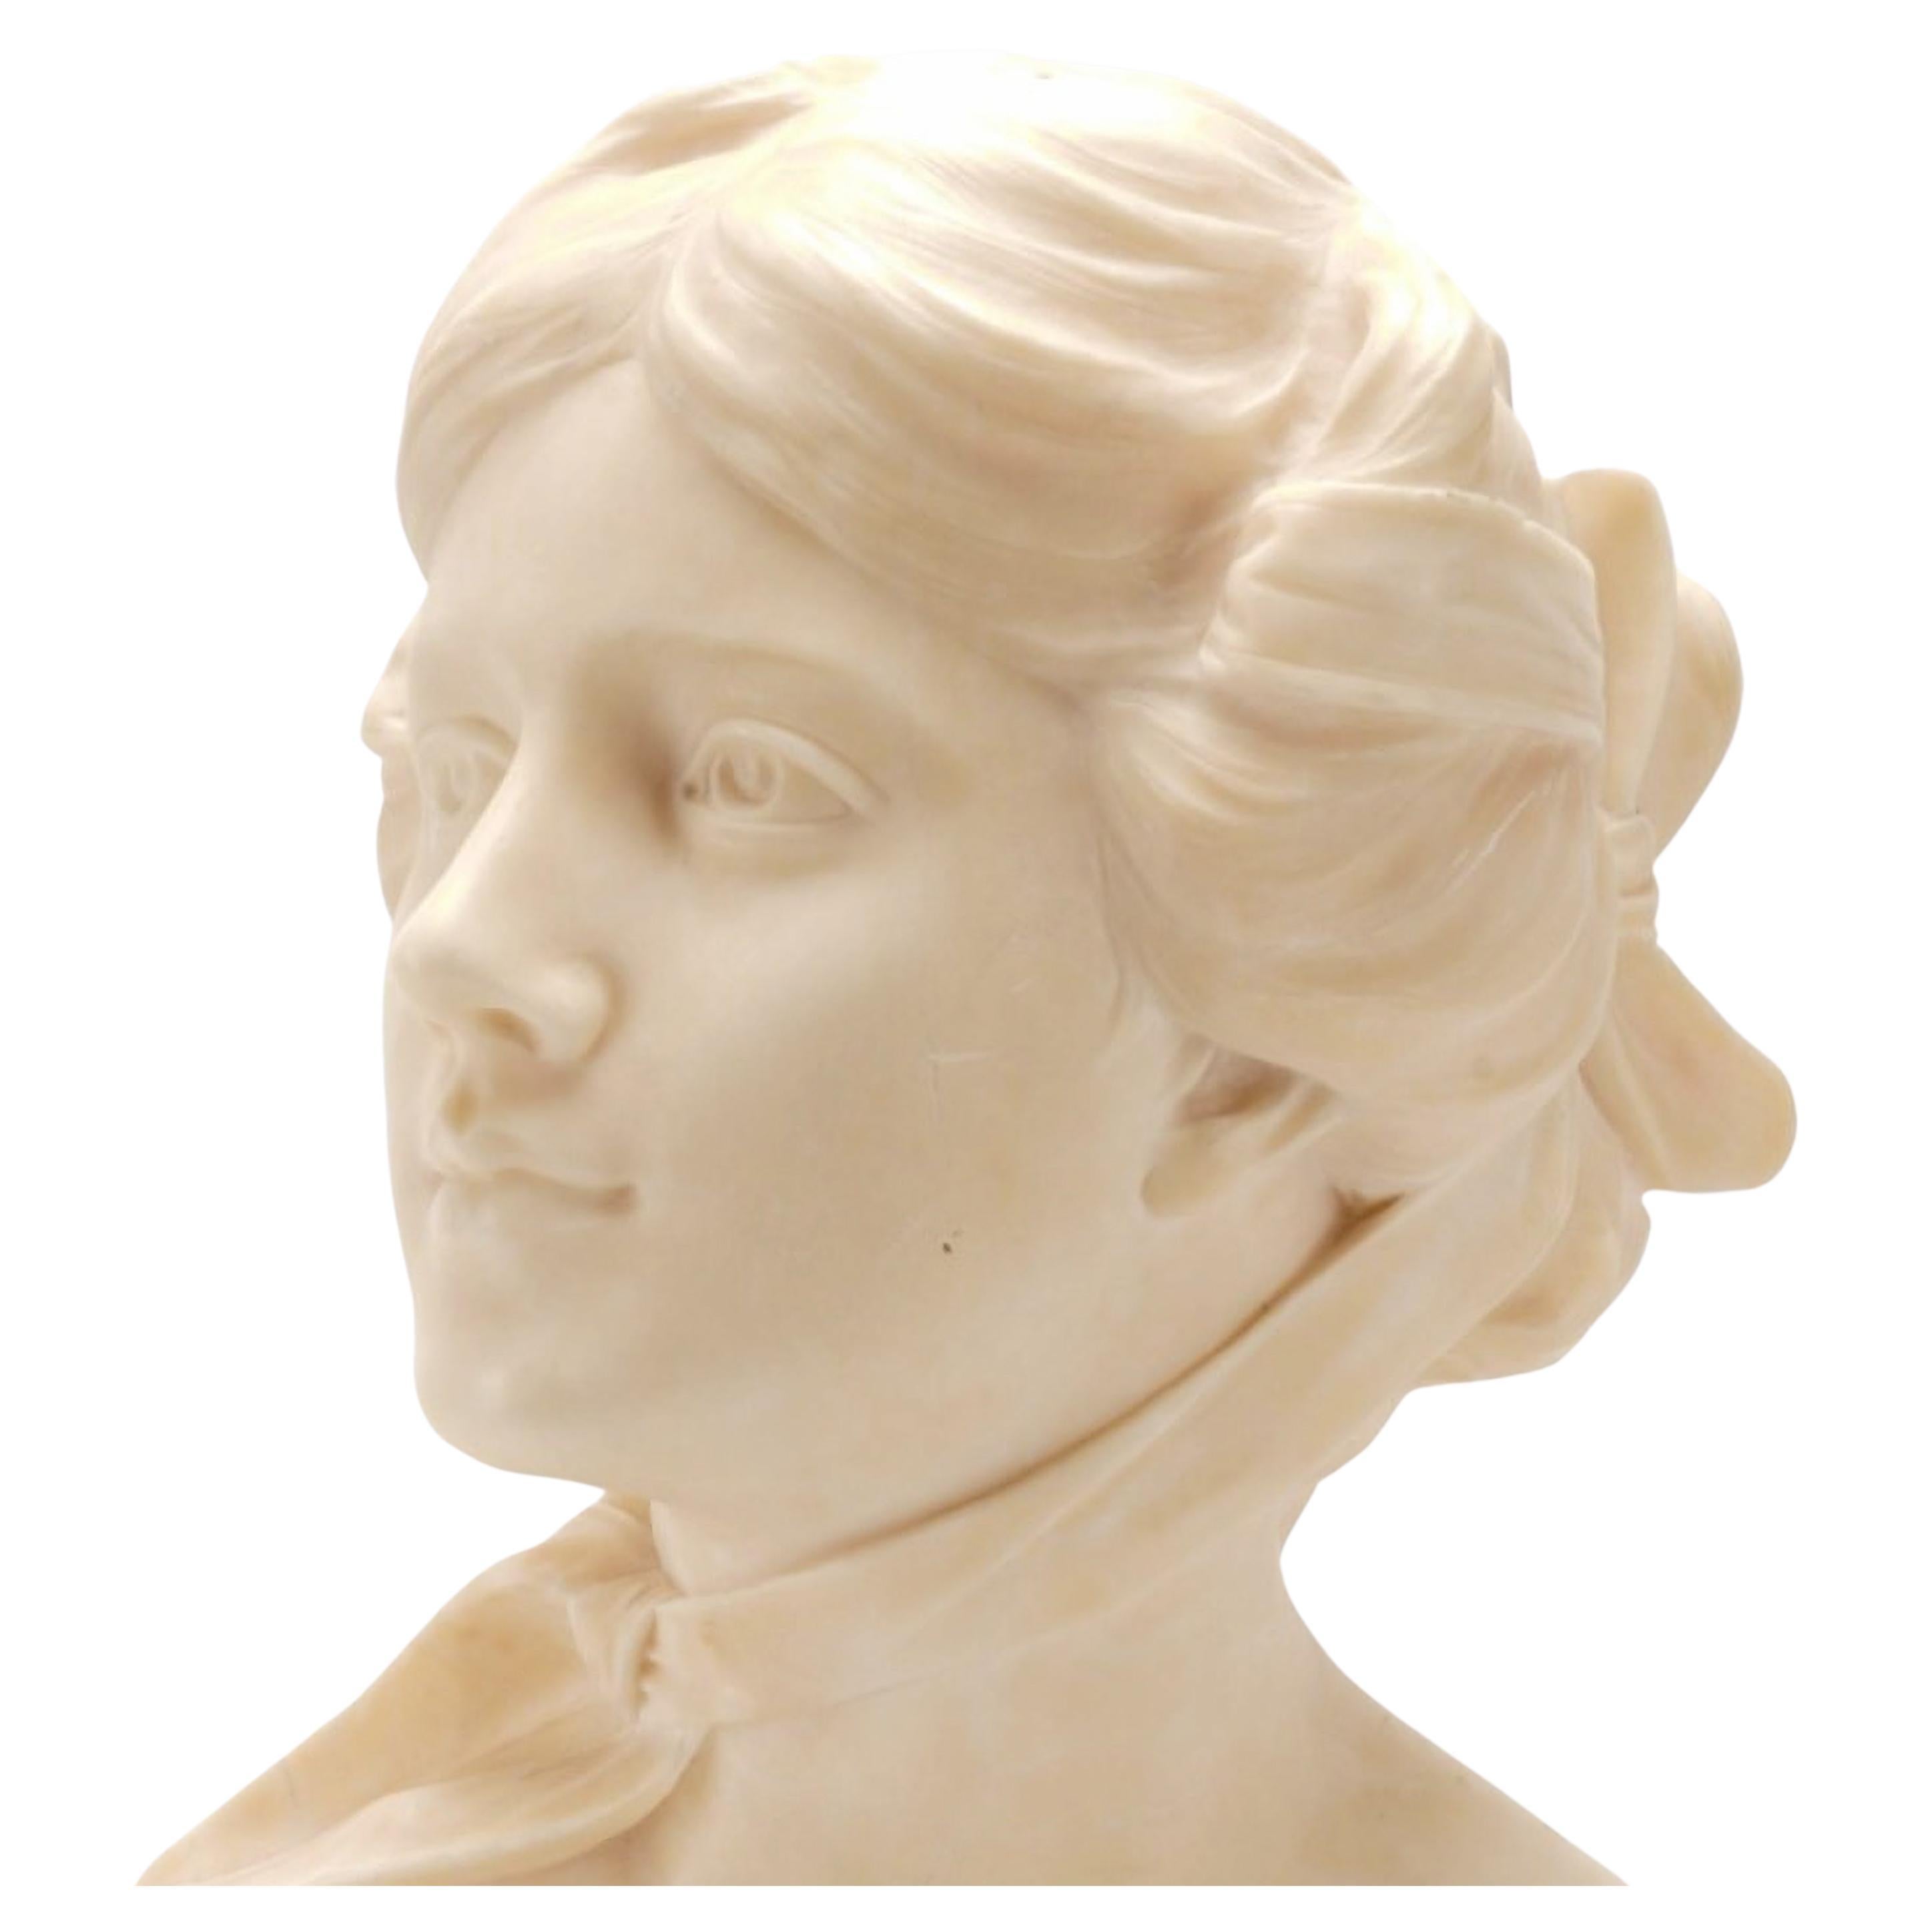 Emilio FIASCHI (1858-1941)
The beautiful Florentine. 
Marble bust.. 
Approx. 57.5x41x25cm. 
Note: Emilio Fiaschi was active in Florence at the end of the 19th century and beginning of the 20th century. 
Signed intaglio on the back.
very good